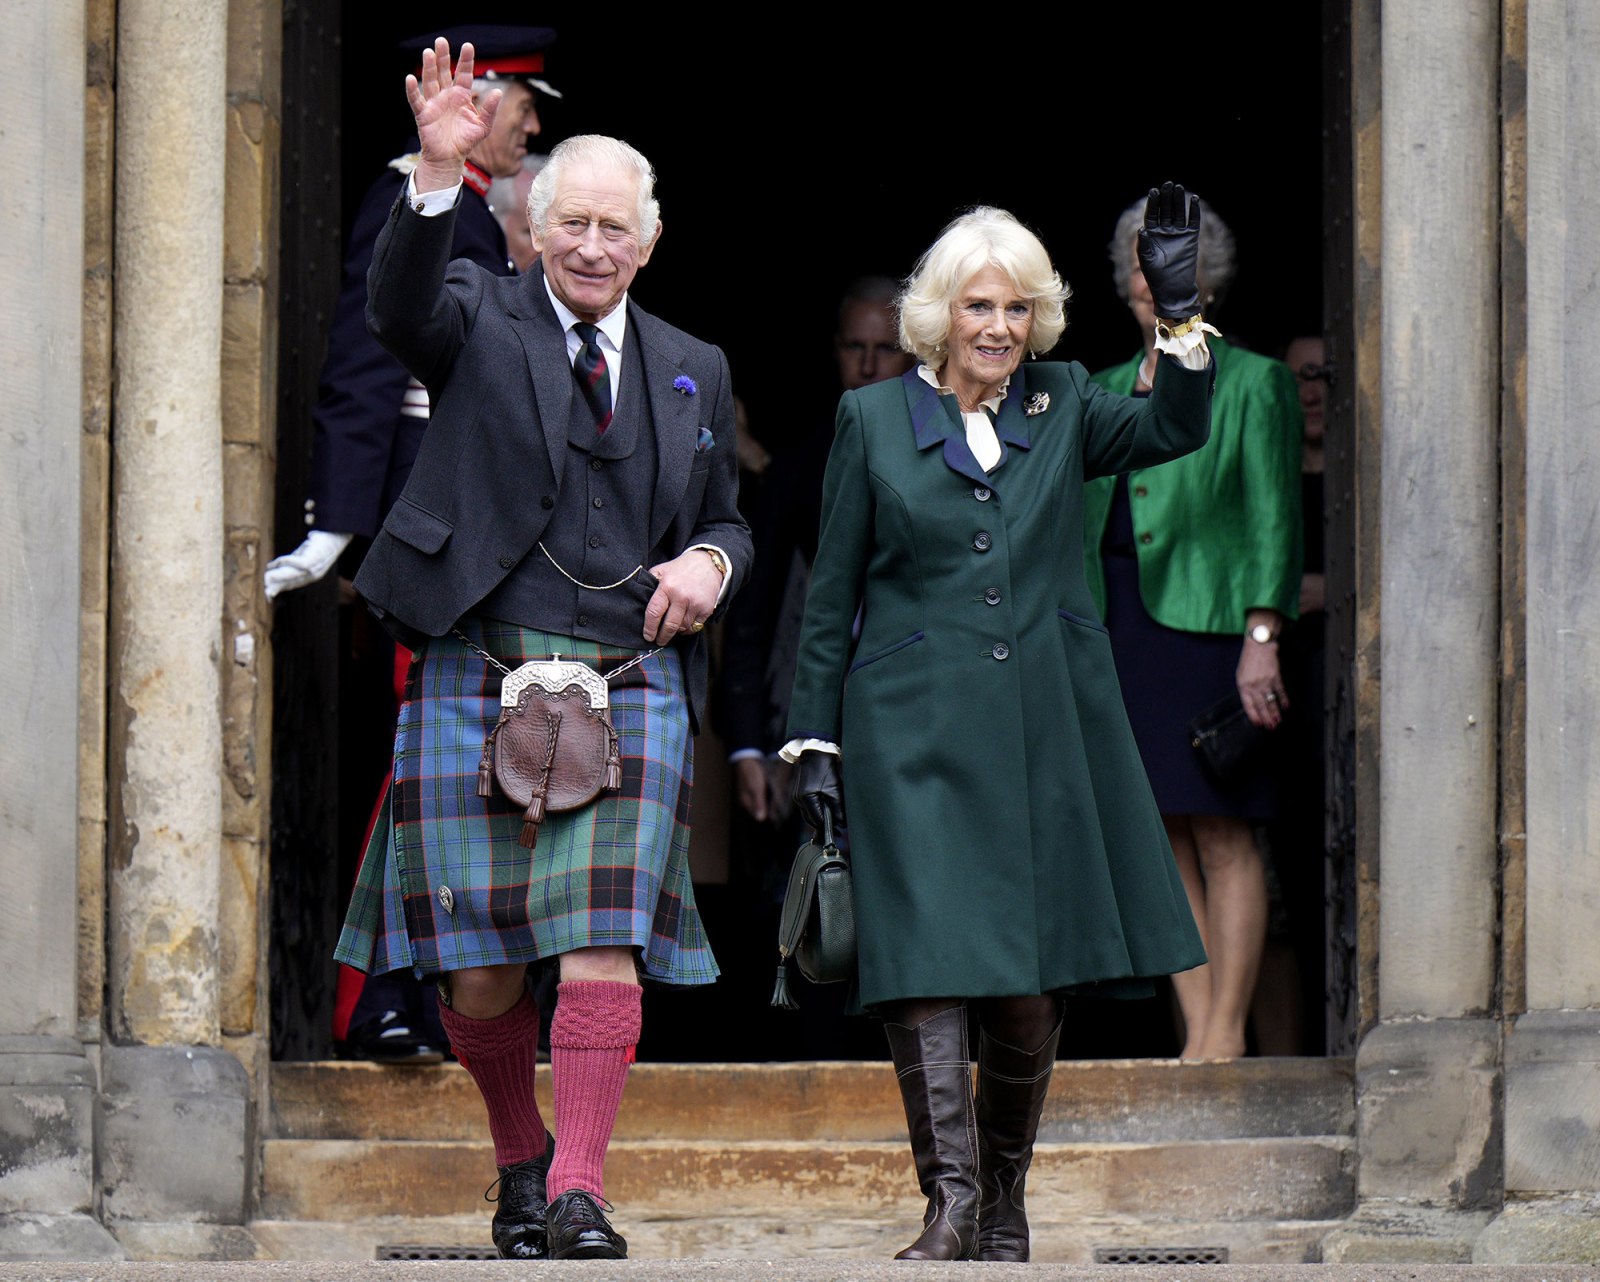 Feature King Charles III and Queen Consort Camilla Visit Scotland for Their 1st Joint Engagement